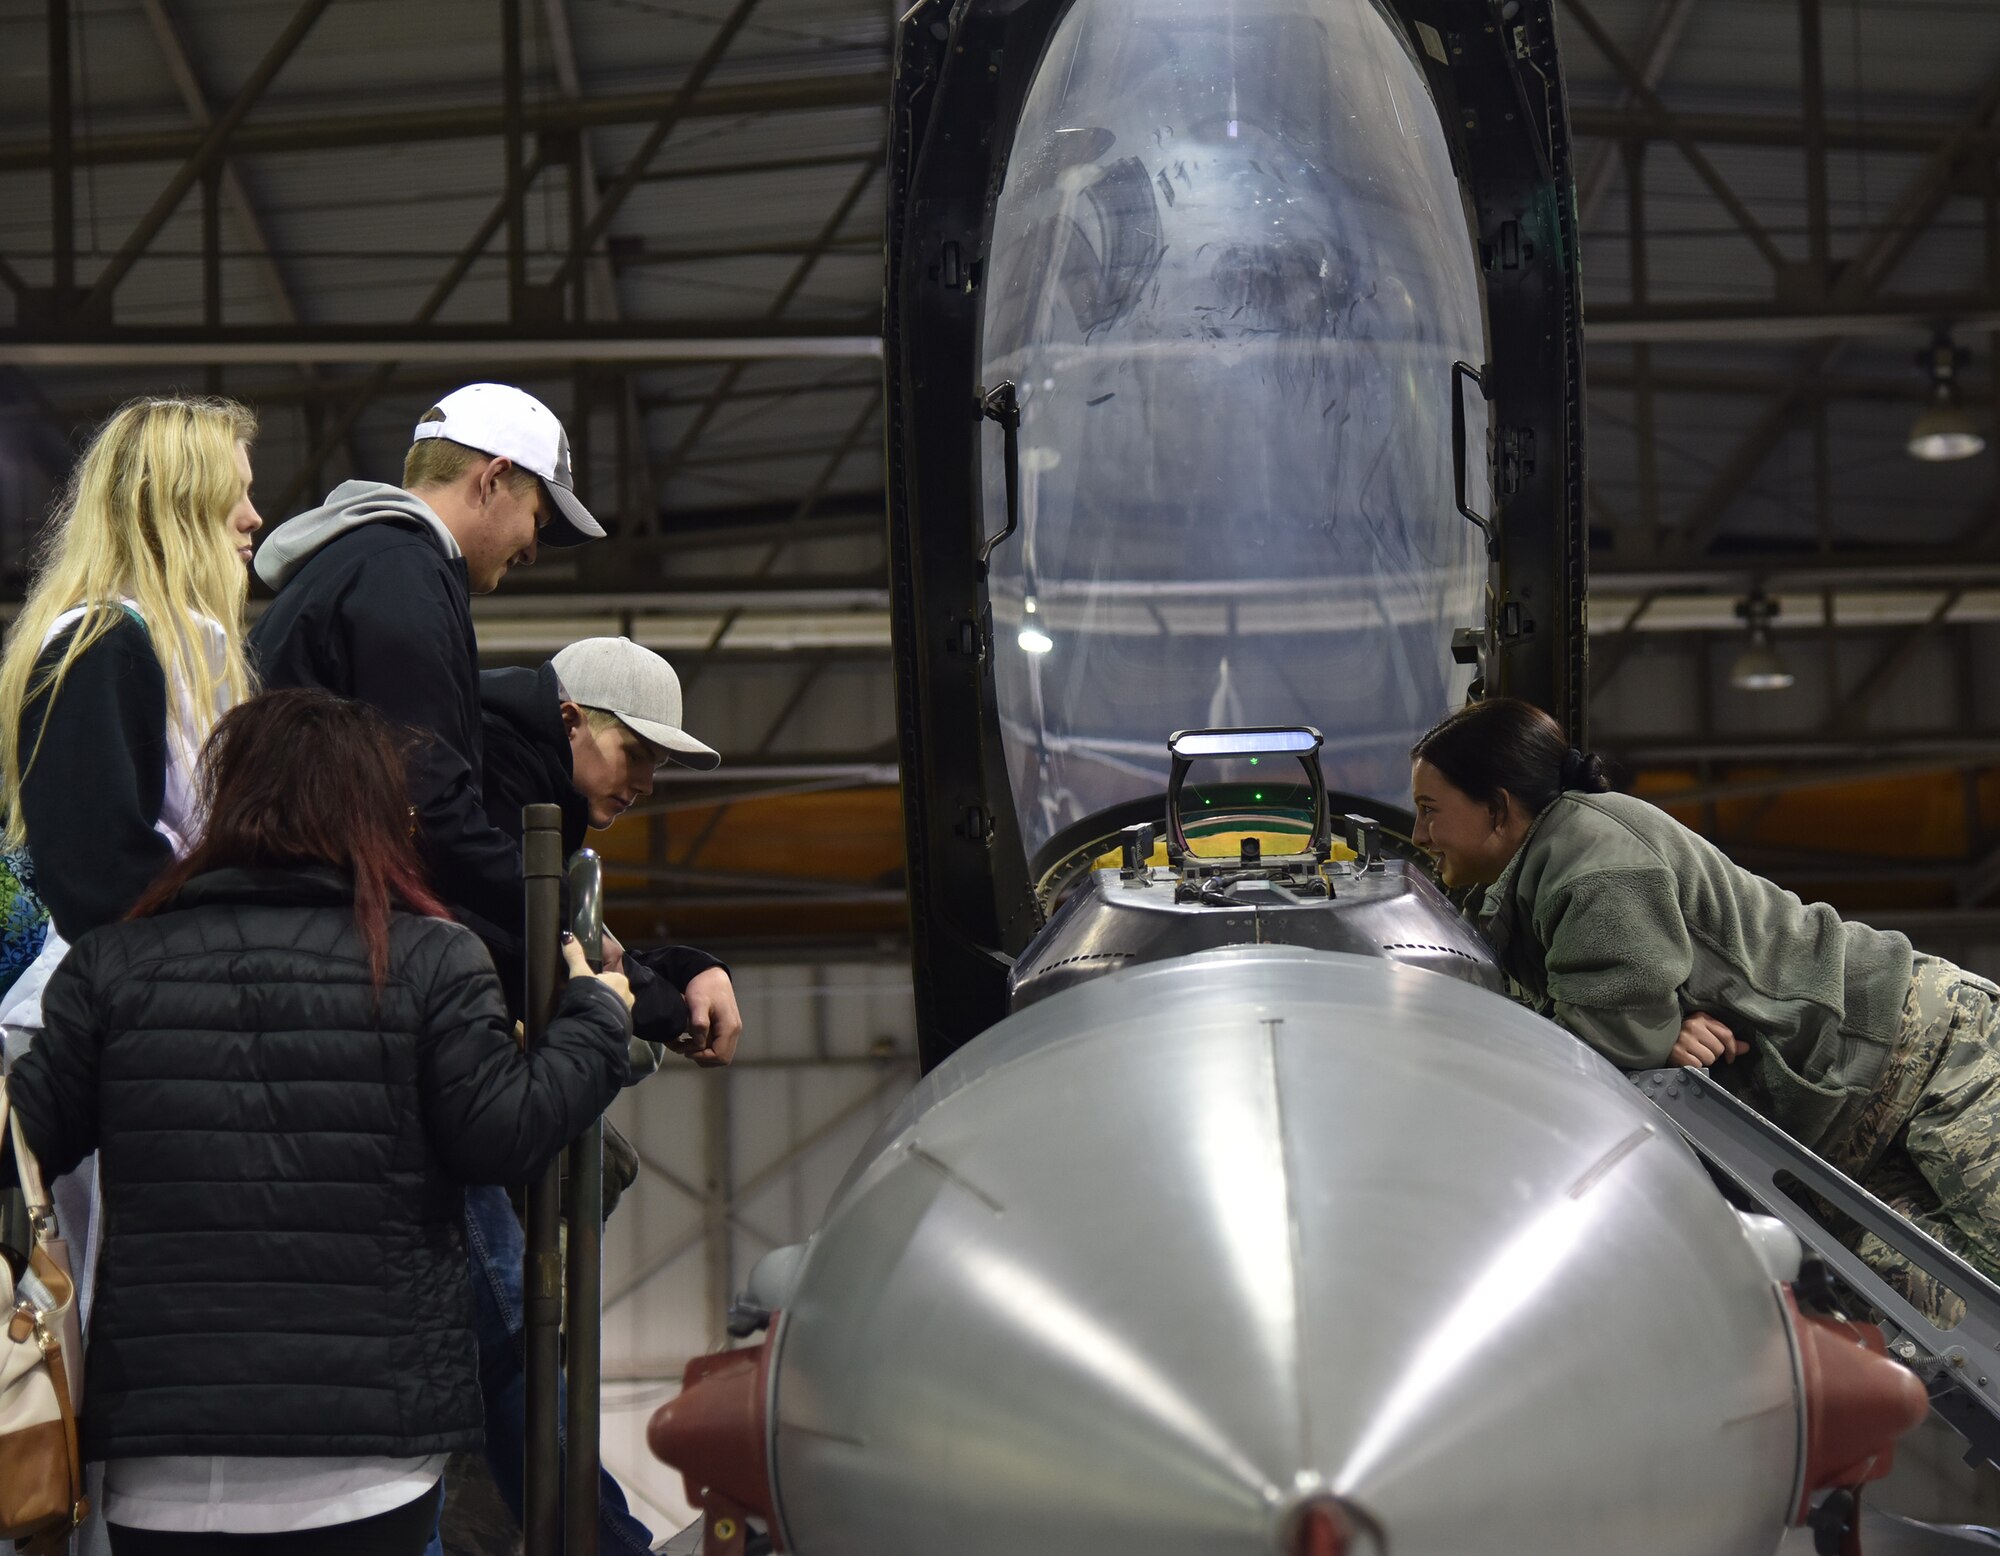 Attendees at the South Dakota Air National Guard career day were shown several areas of the unit that might be of interest to them including getting a close-up view of the cockpit of an F-16 Fighting Falcon.